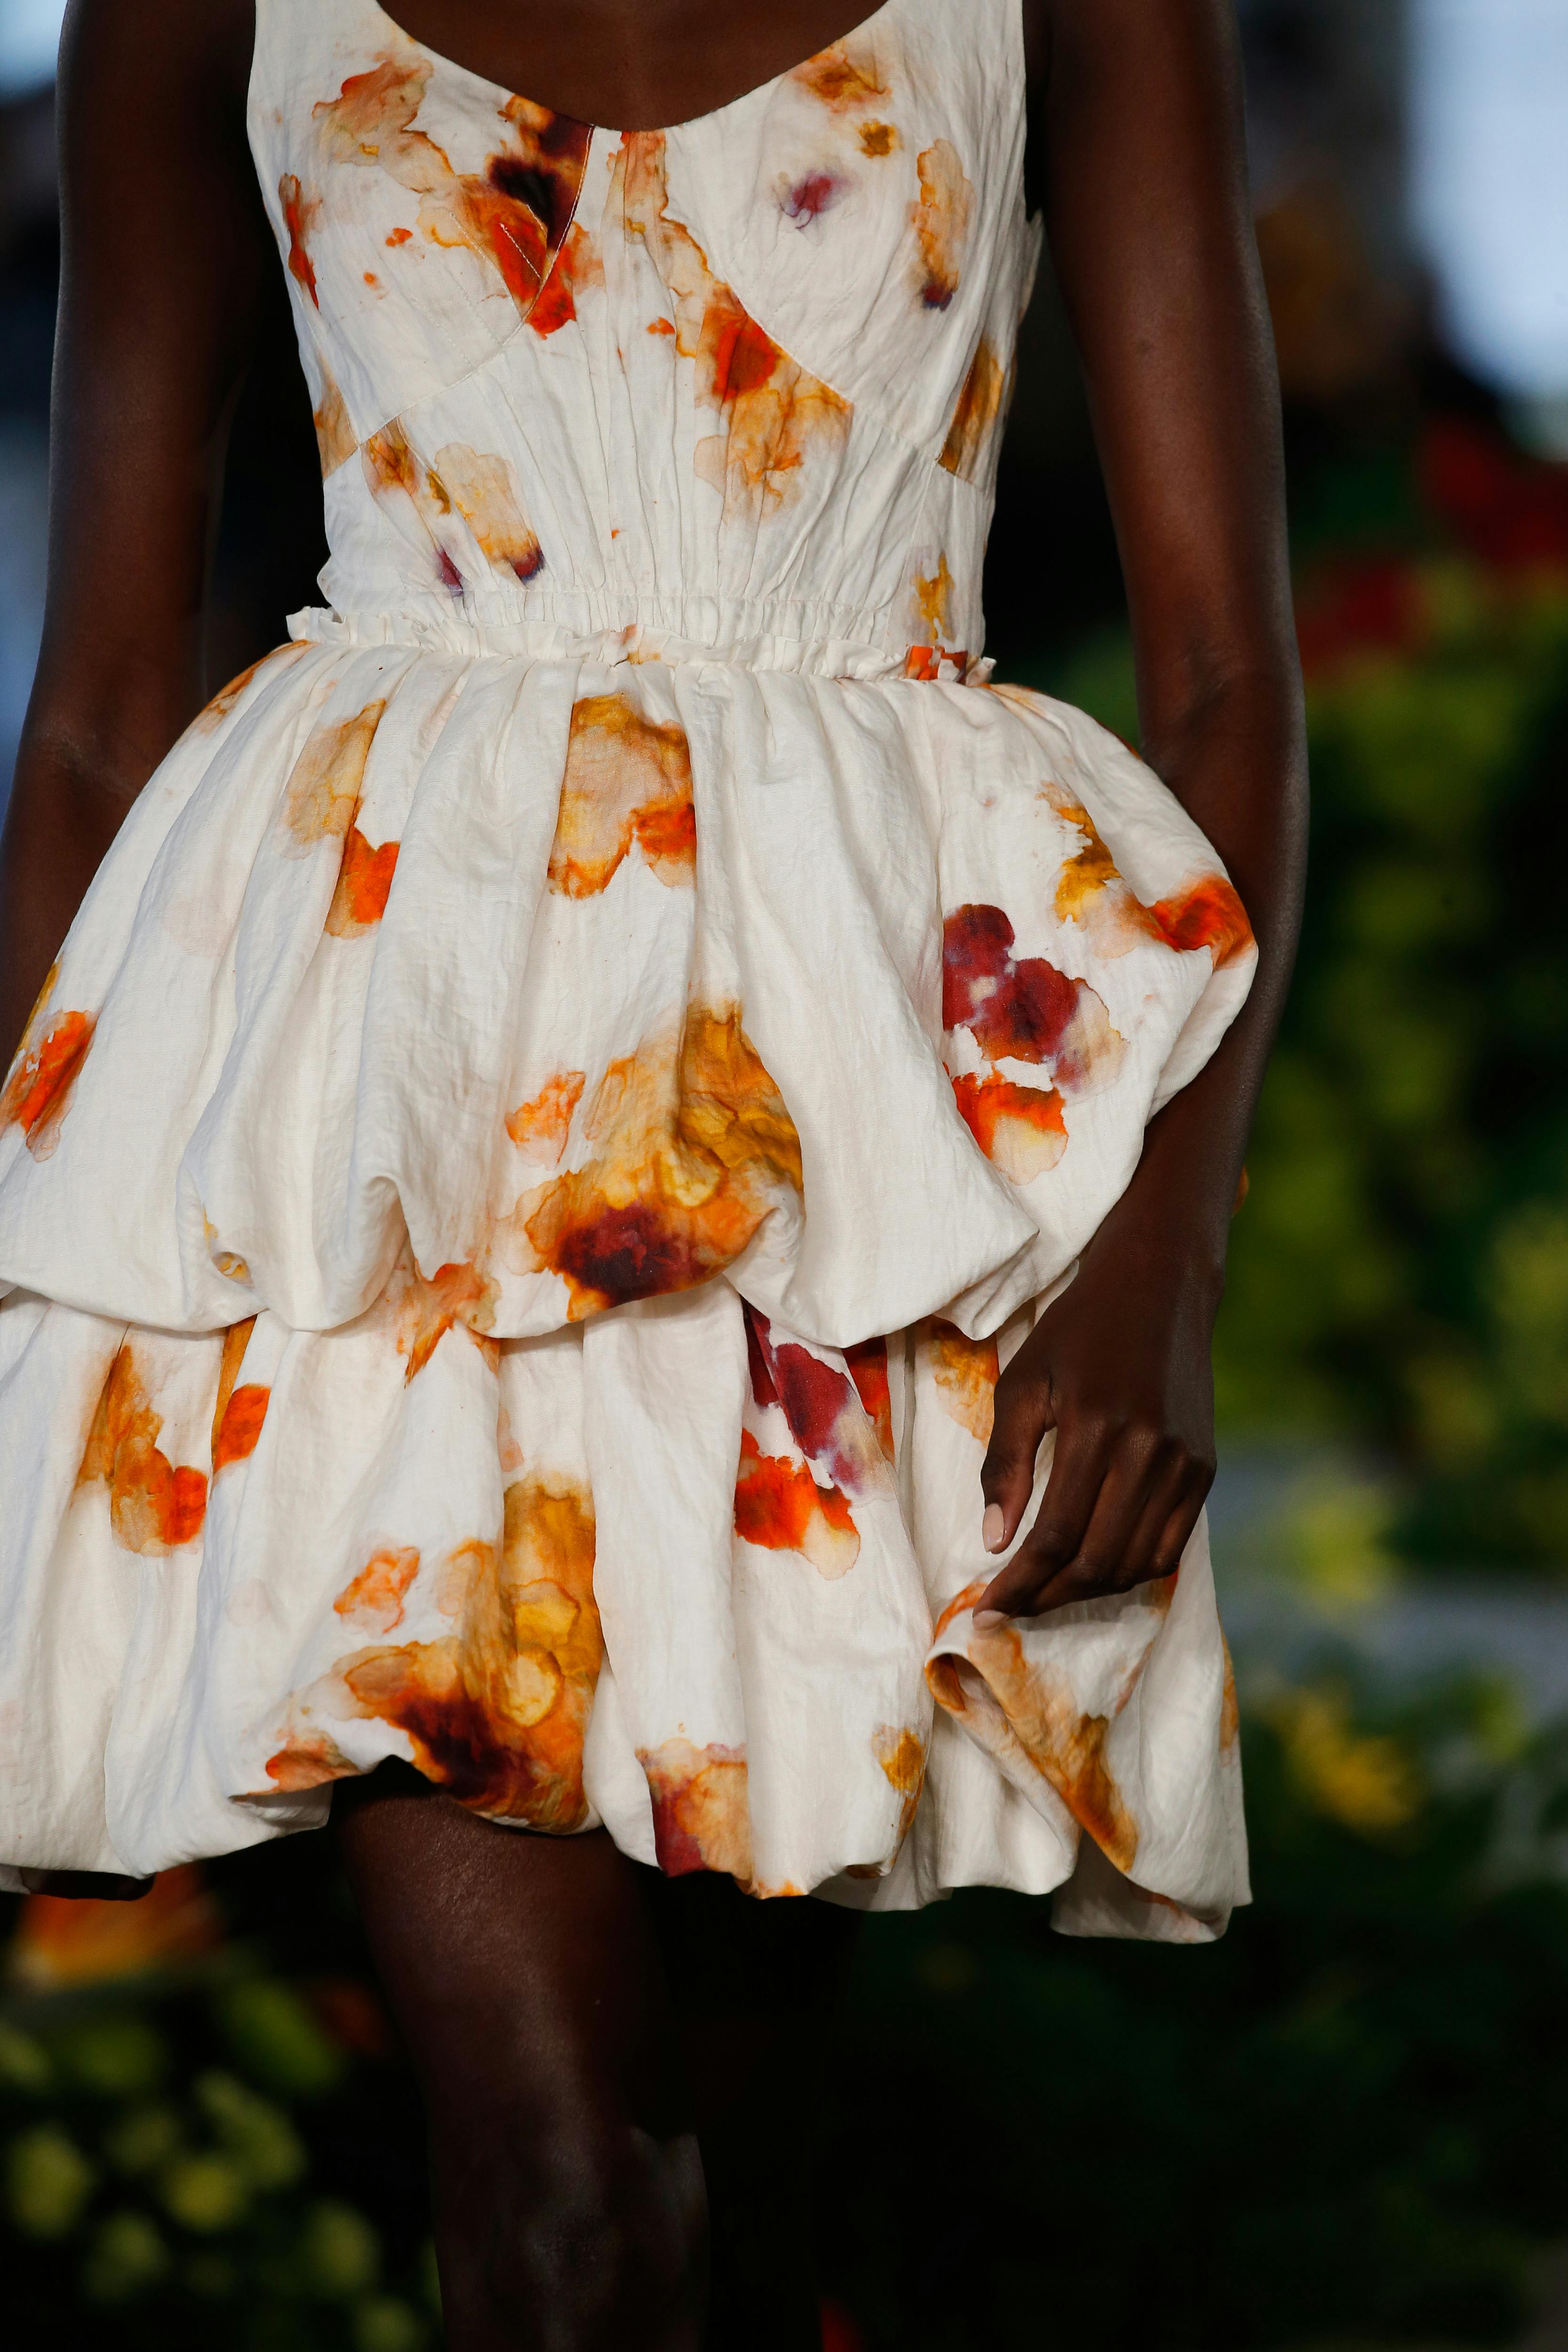 hand dyed dress that is white with orange blotches reminiscent of blossoms